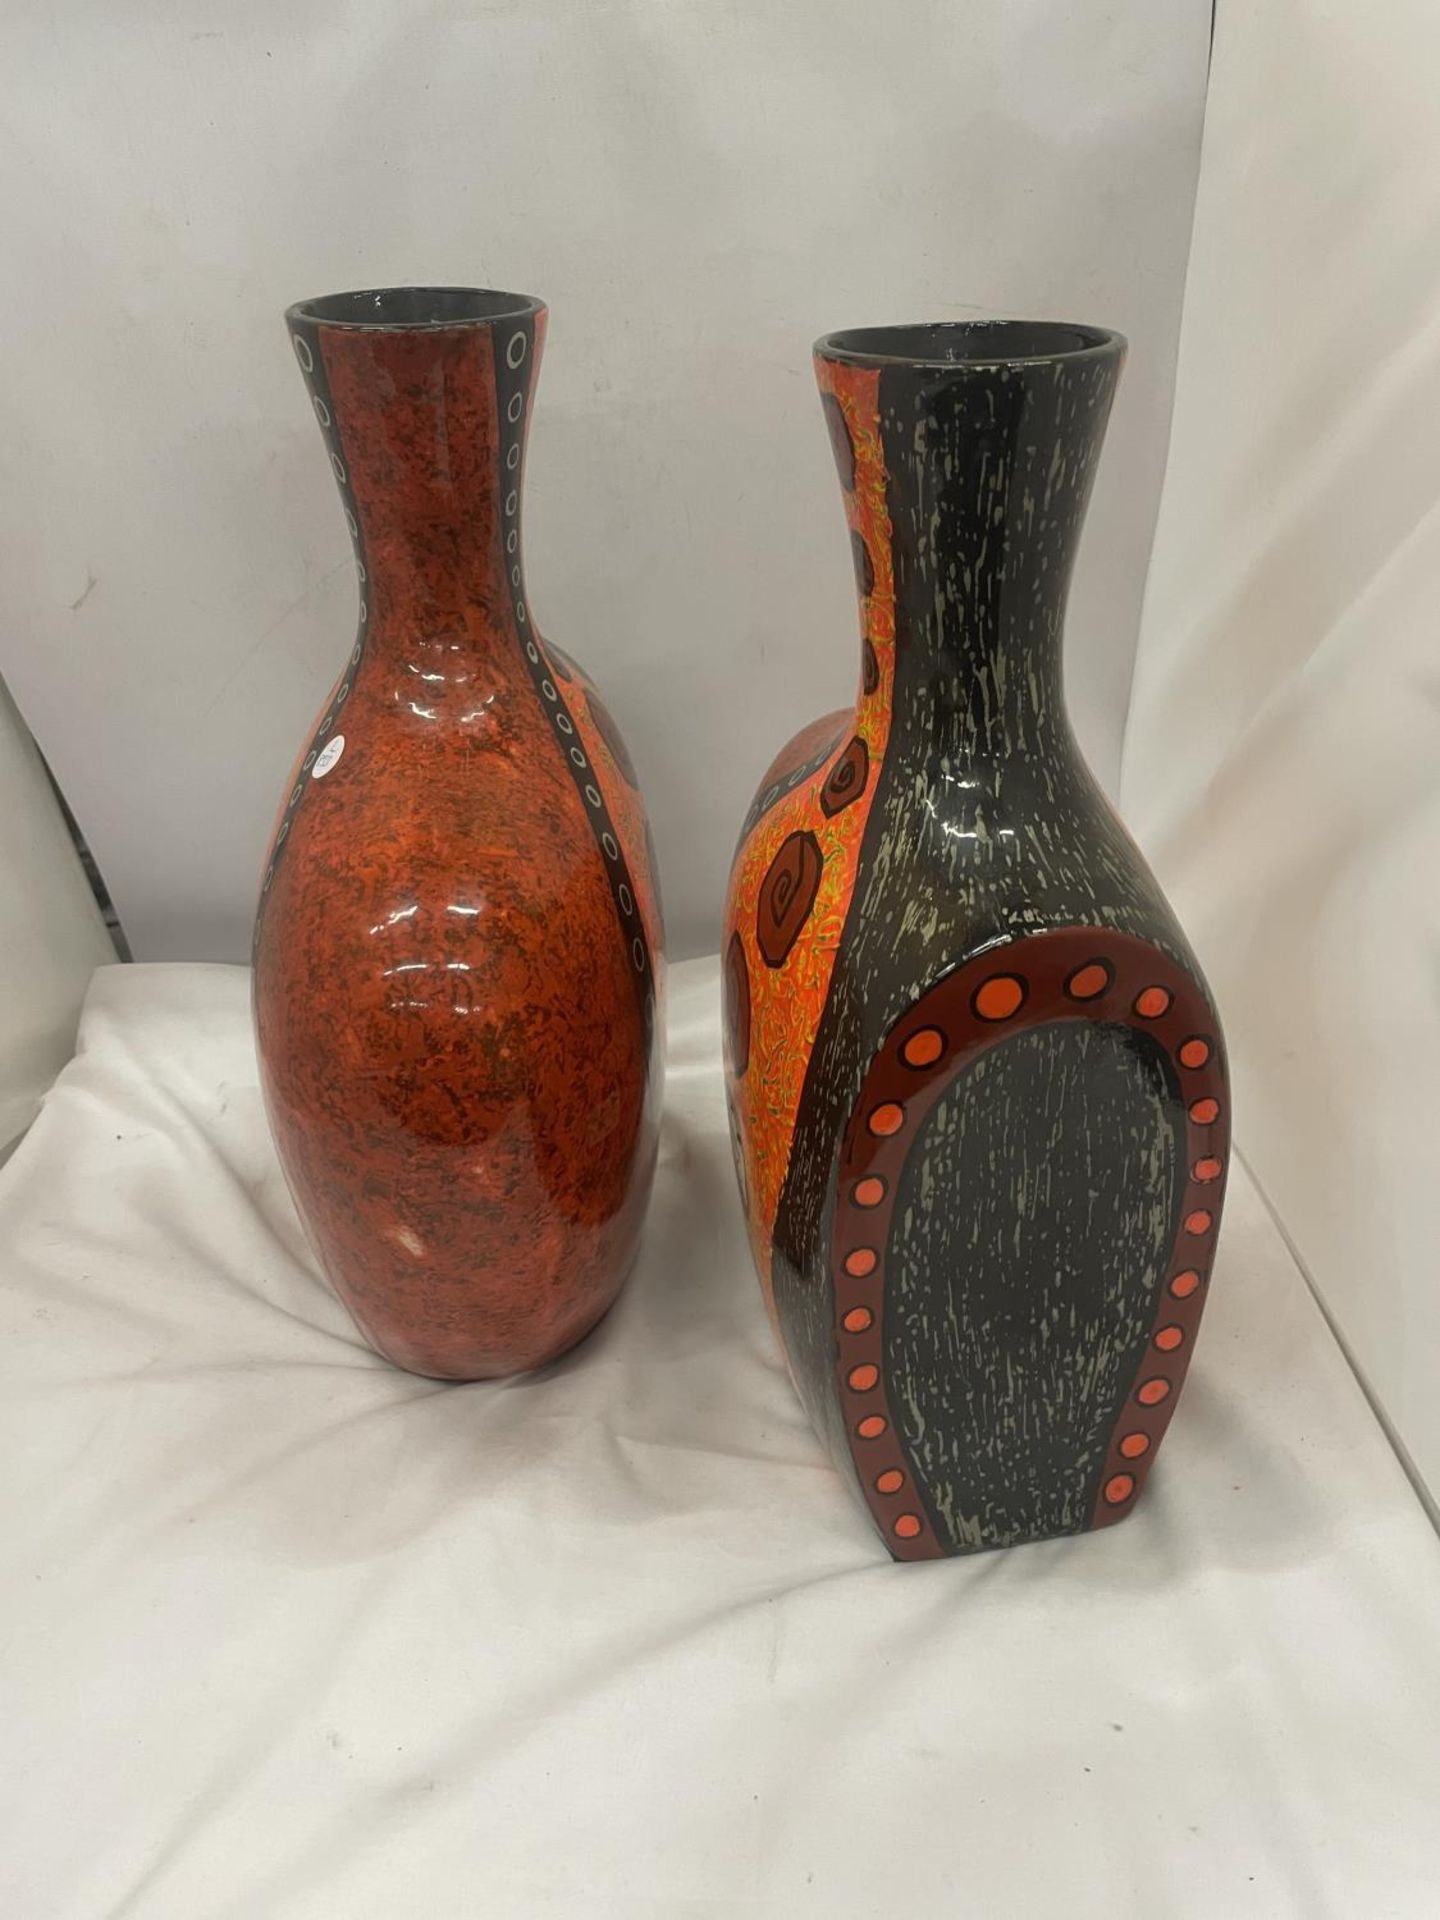 A PAIR OF TALL STUDIO POTTERY VASES - Image 5 of 6